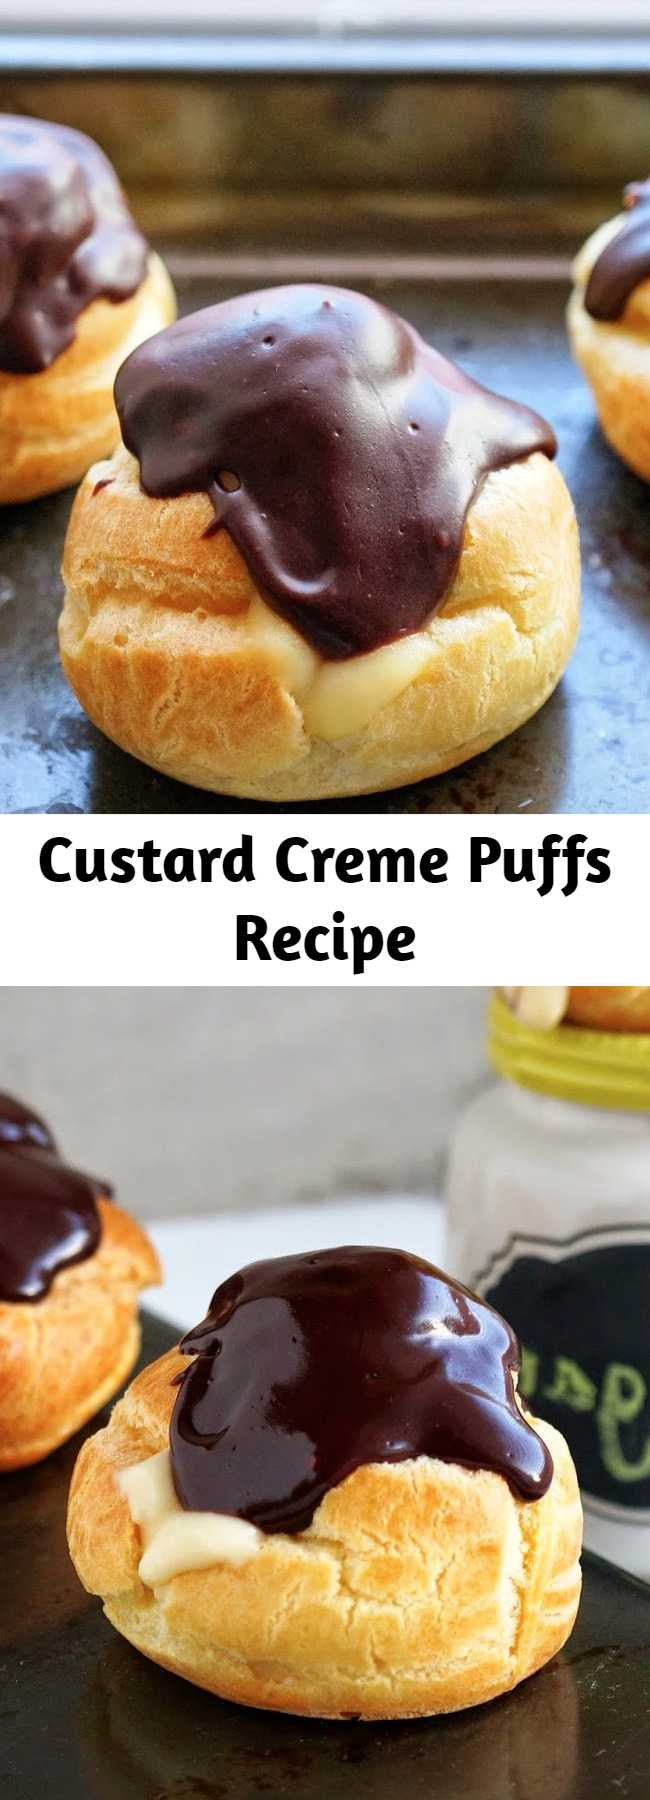 Custard Creme Puffs Recipe - Their pillowy softness and creamy centers just mellow me out. You literally cannot go wrong with custard and chocolate.